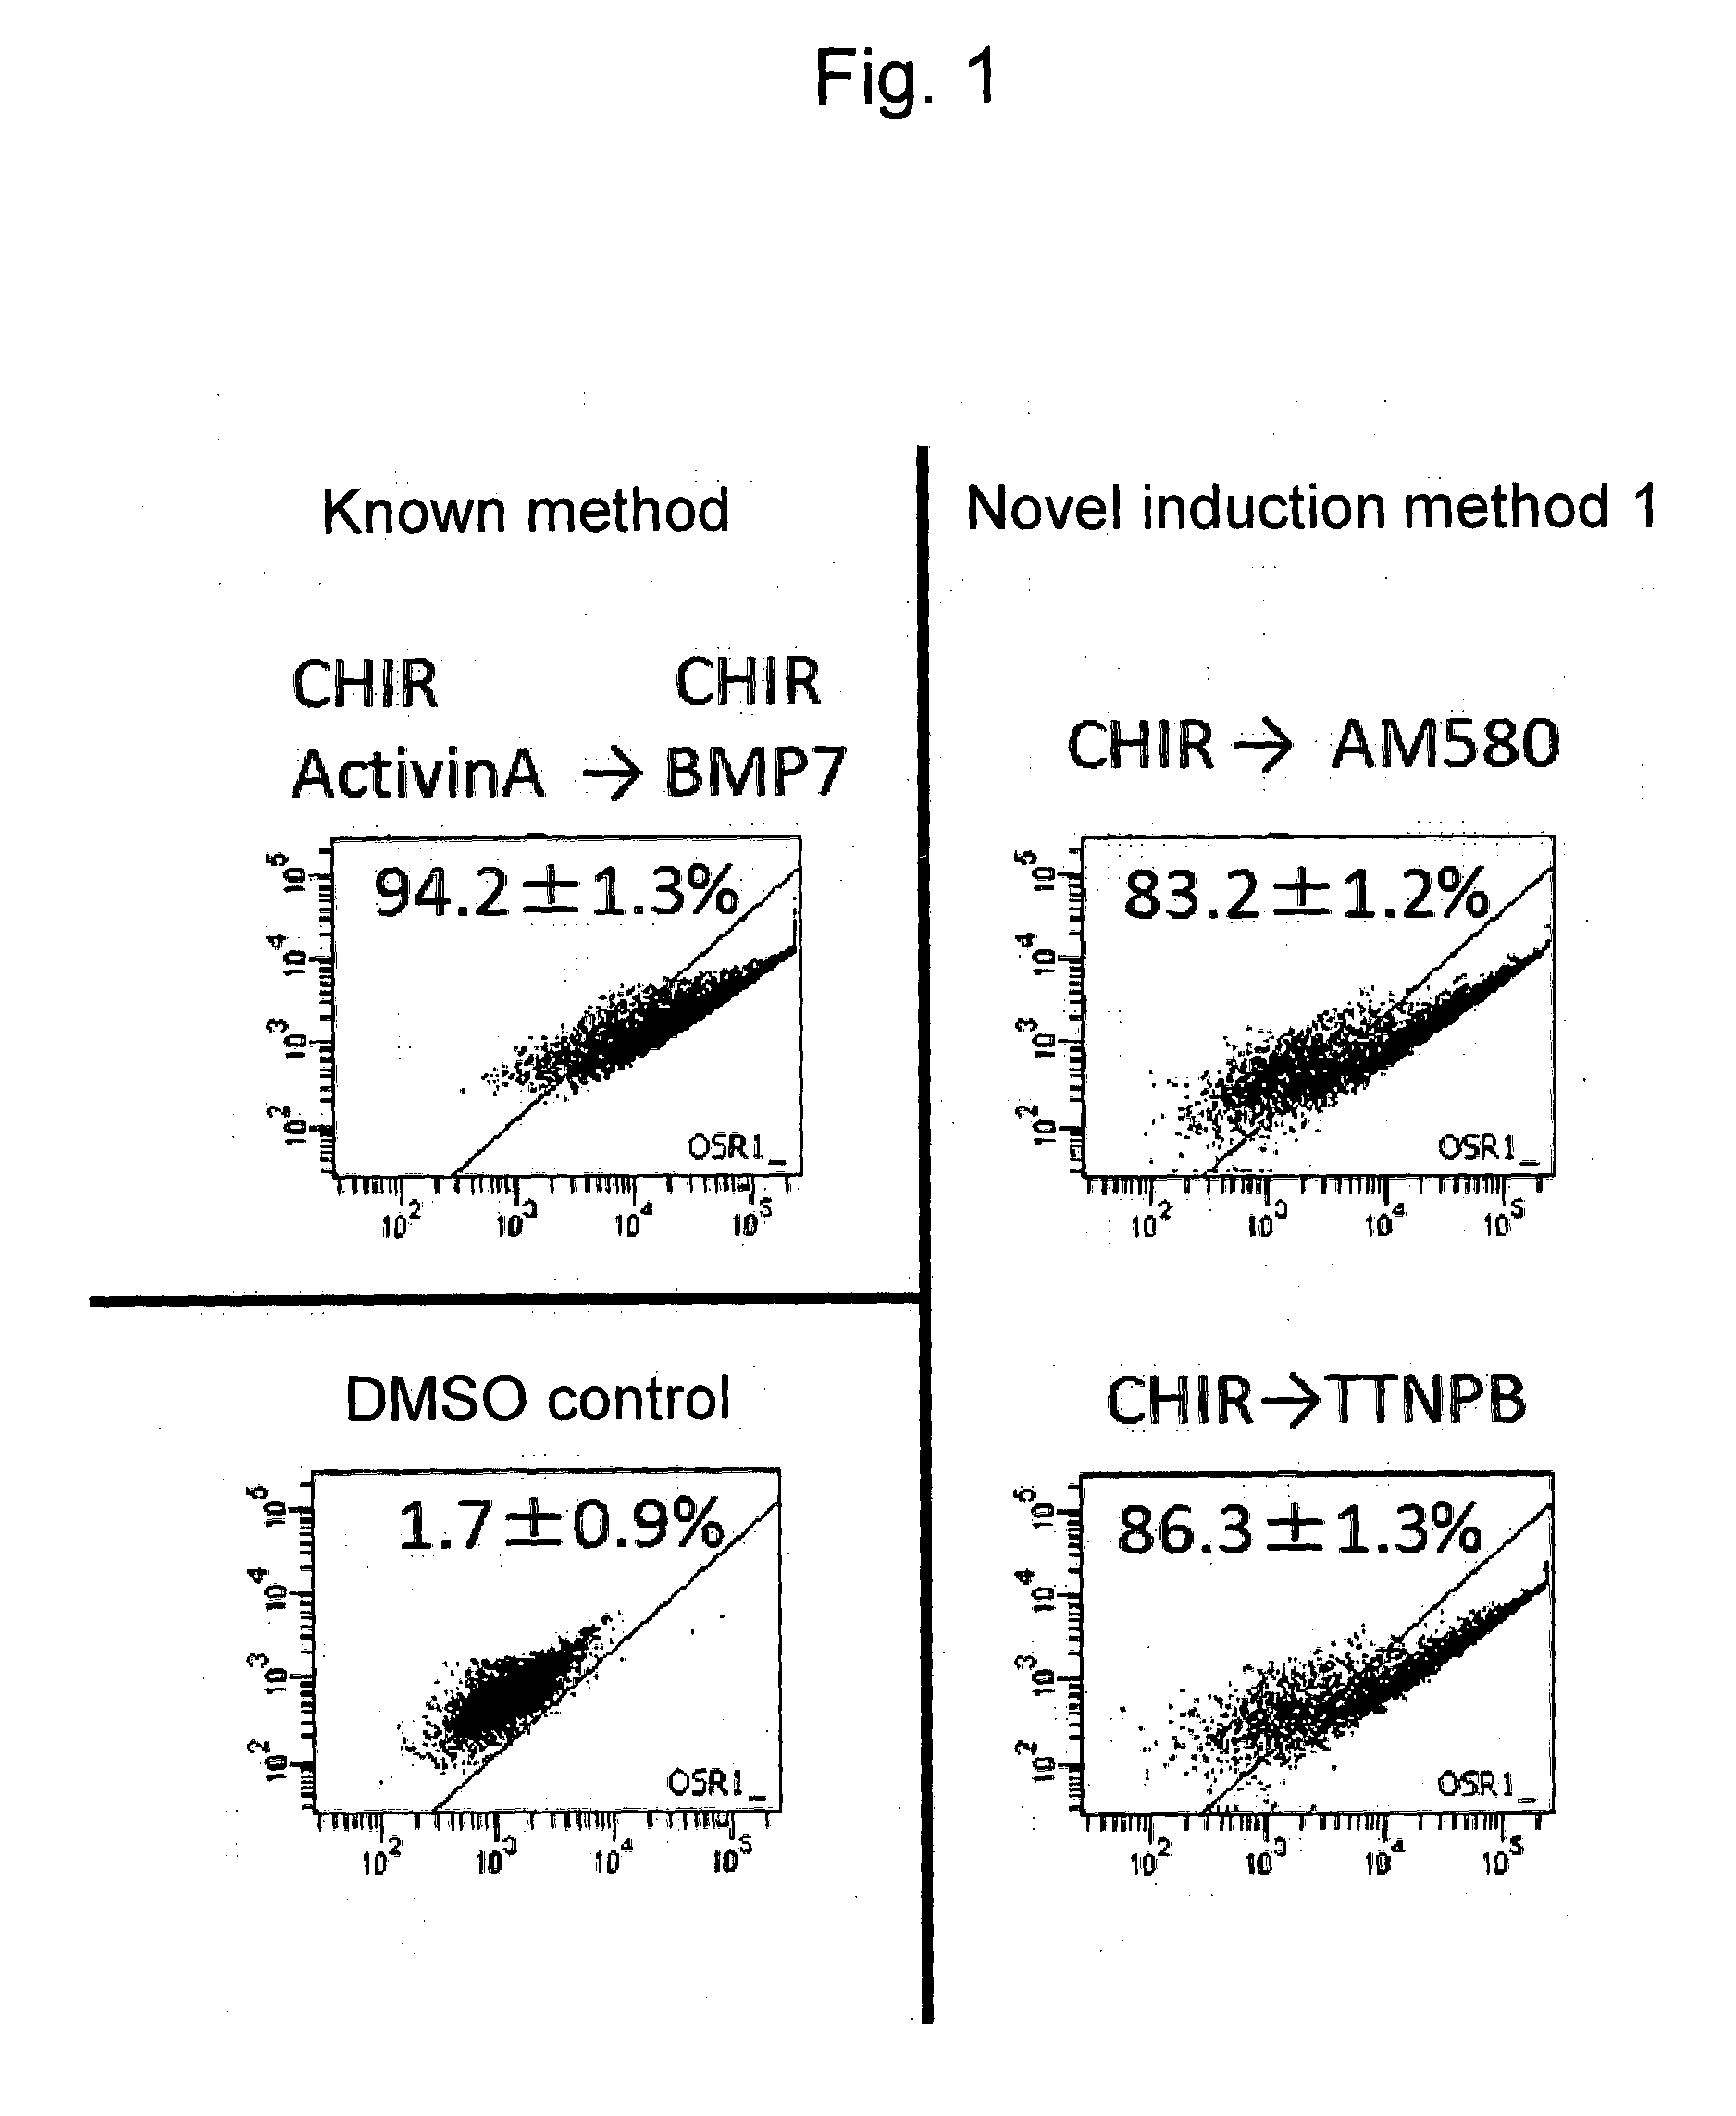 Method for inducing differentiation of human pluripotent stem cells into intermediate mesoderm cells